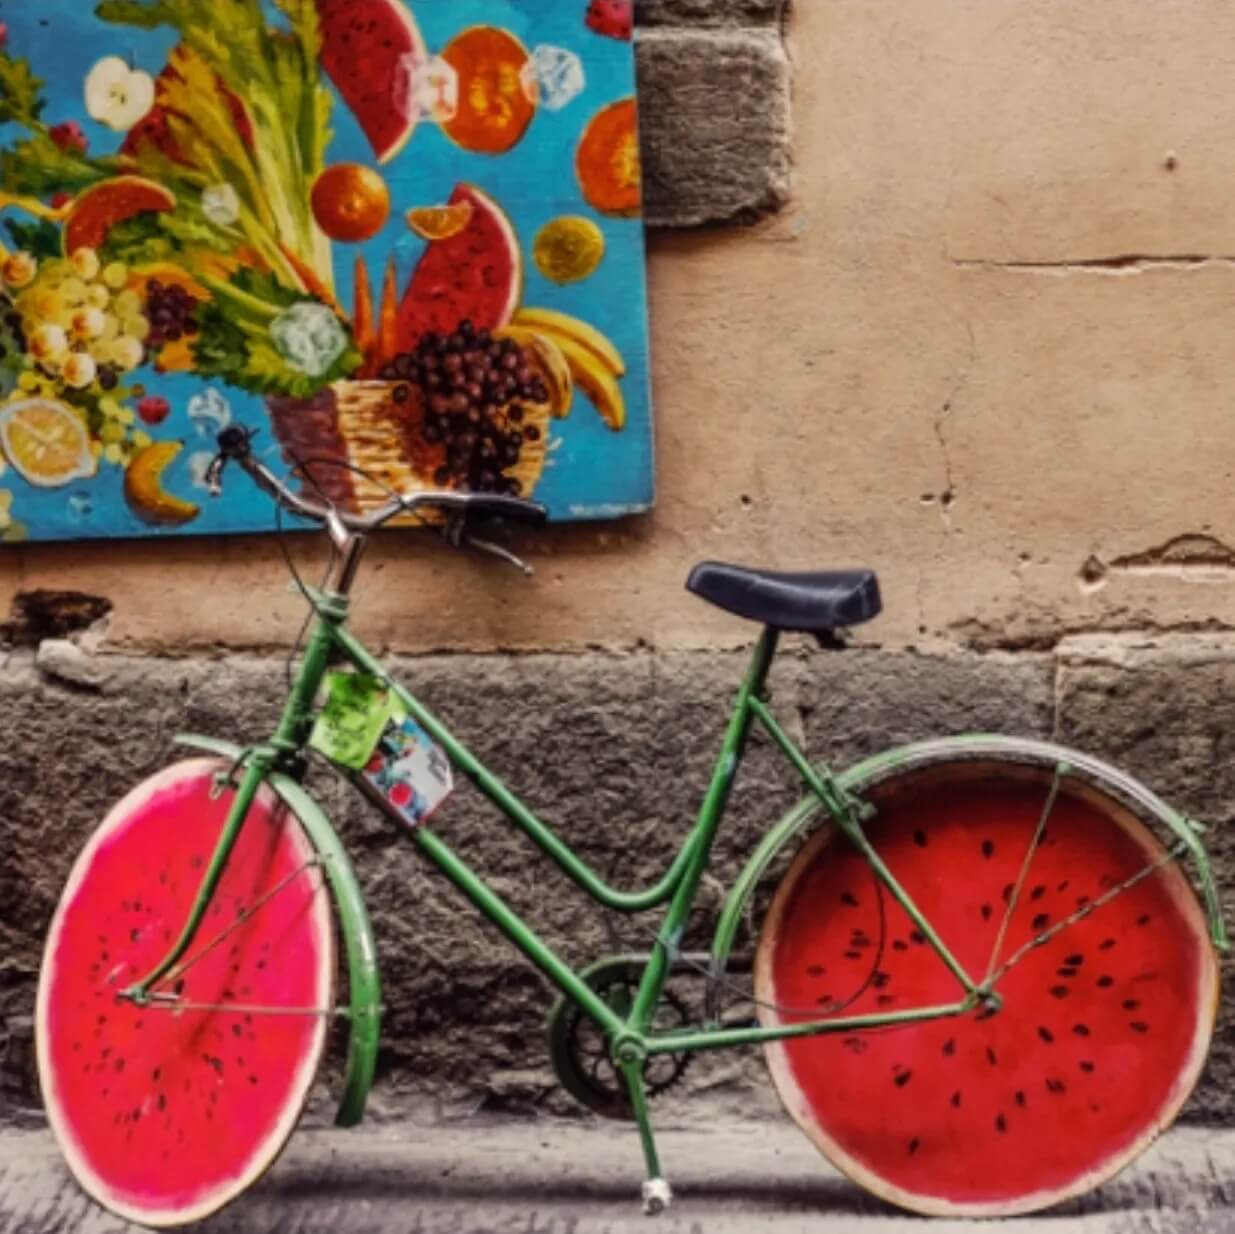 Watermelon tires cycle on the road